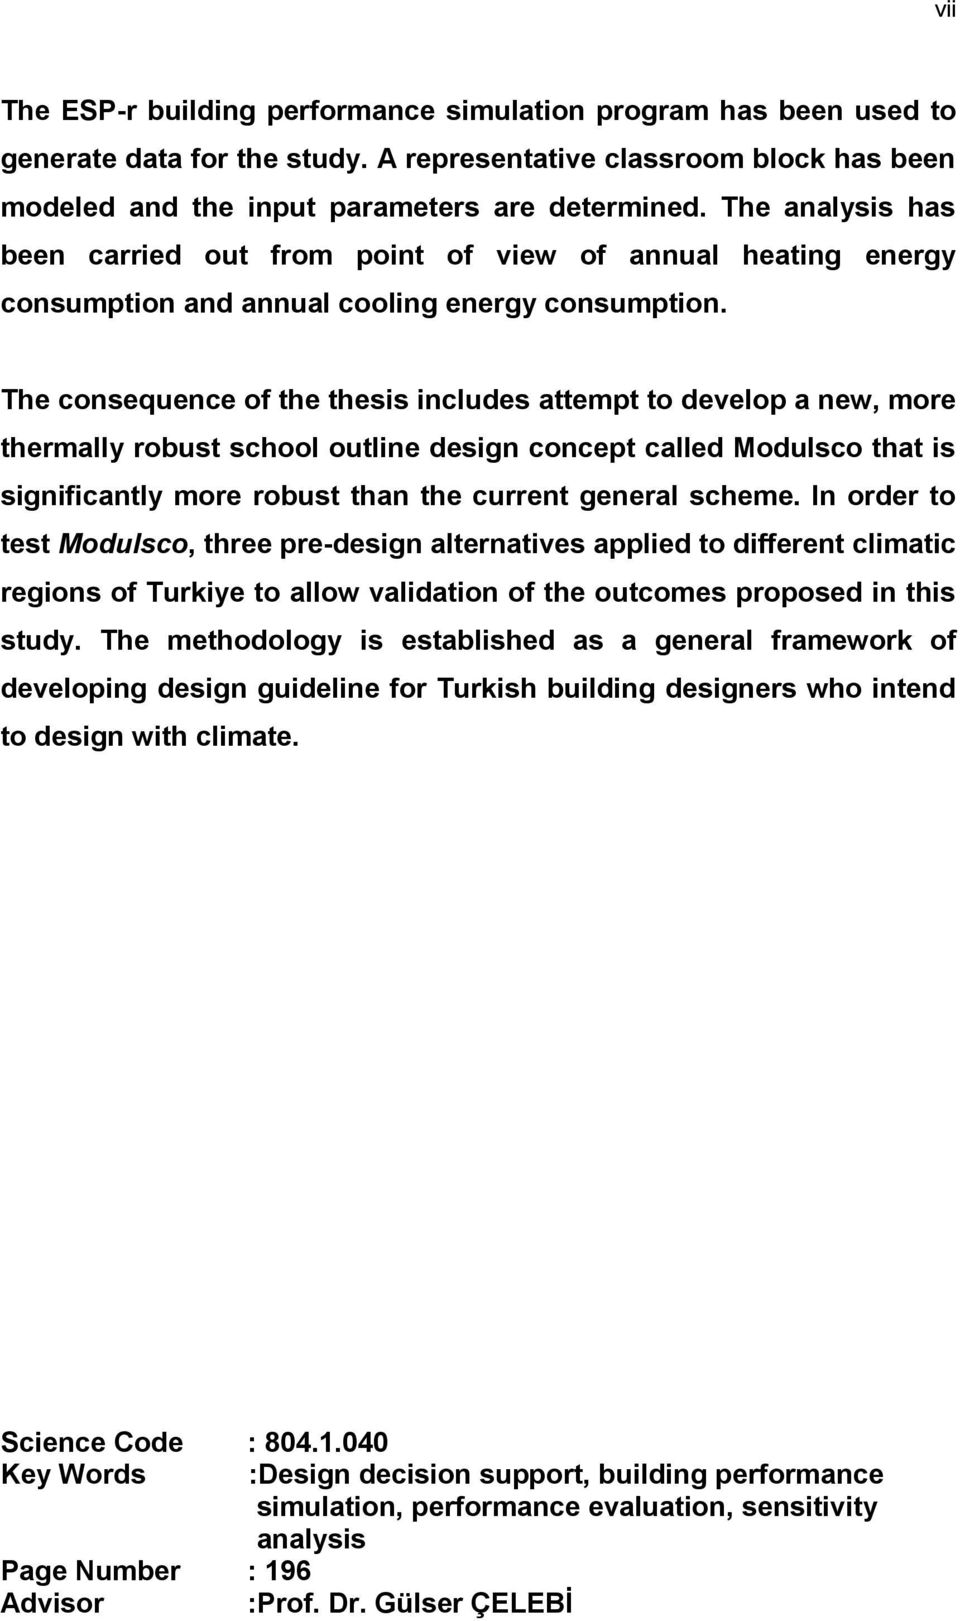 The consequence of the thesis includes attempt to develop a new, more thermally robust school outline design concept called Modulsco that is significantly more robust than the current general scheme.